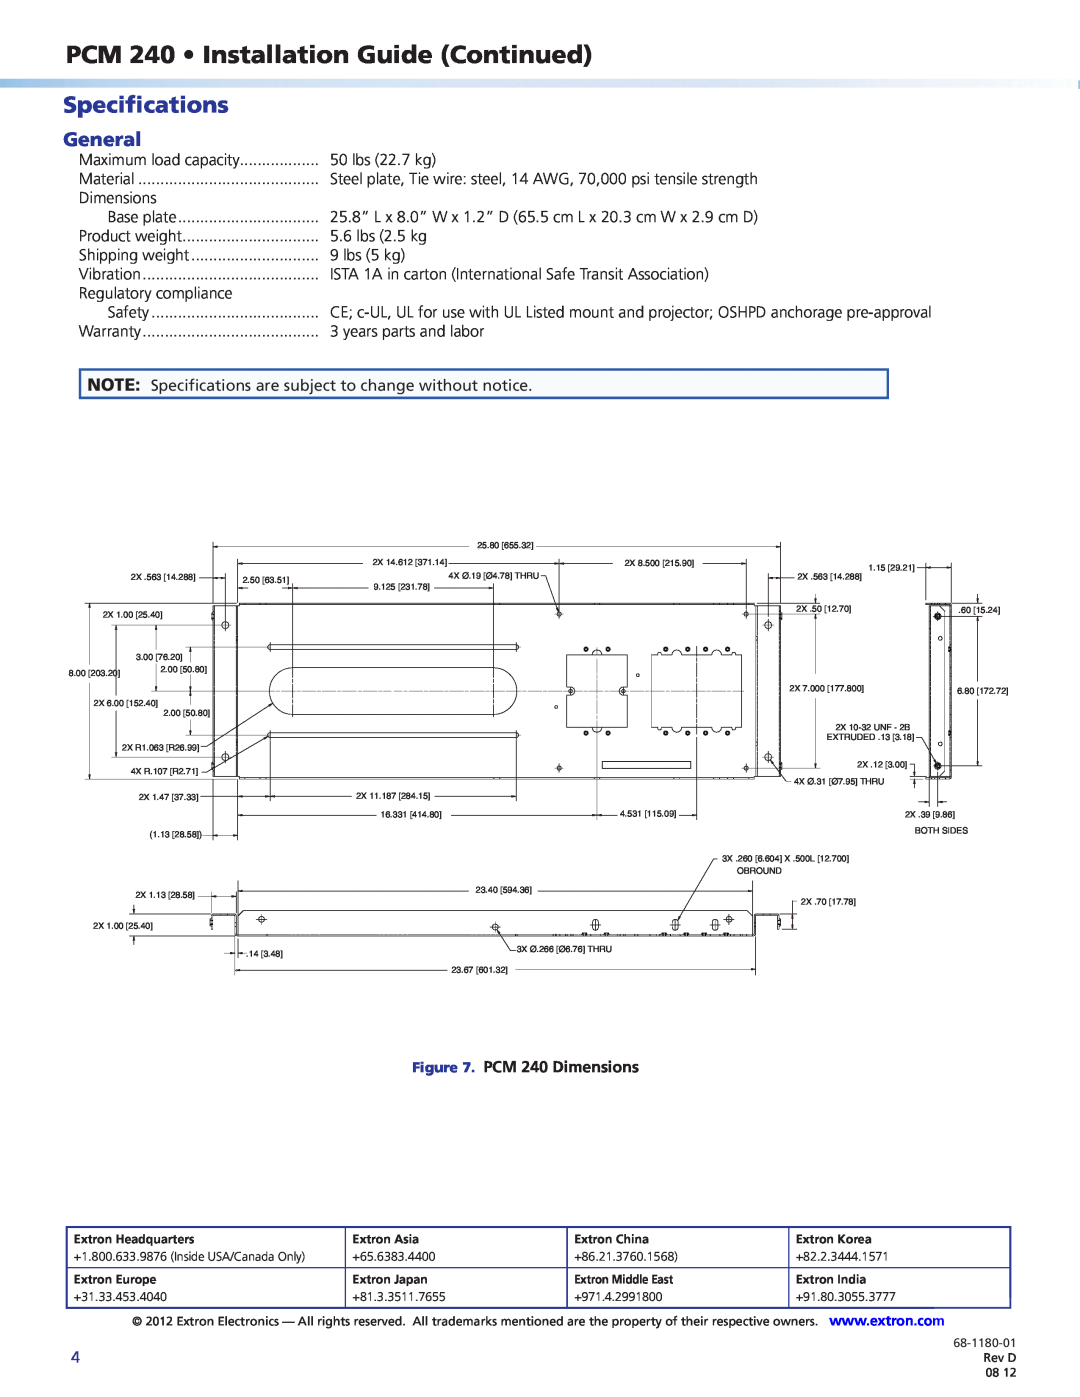 Extron electronic Specifications, General, PCM 240 Dimensions, PCM 240 Installation Guide Continued 